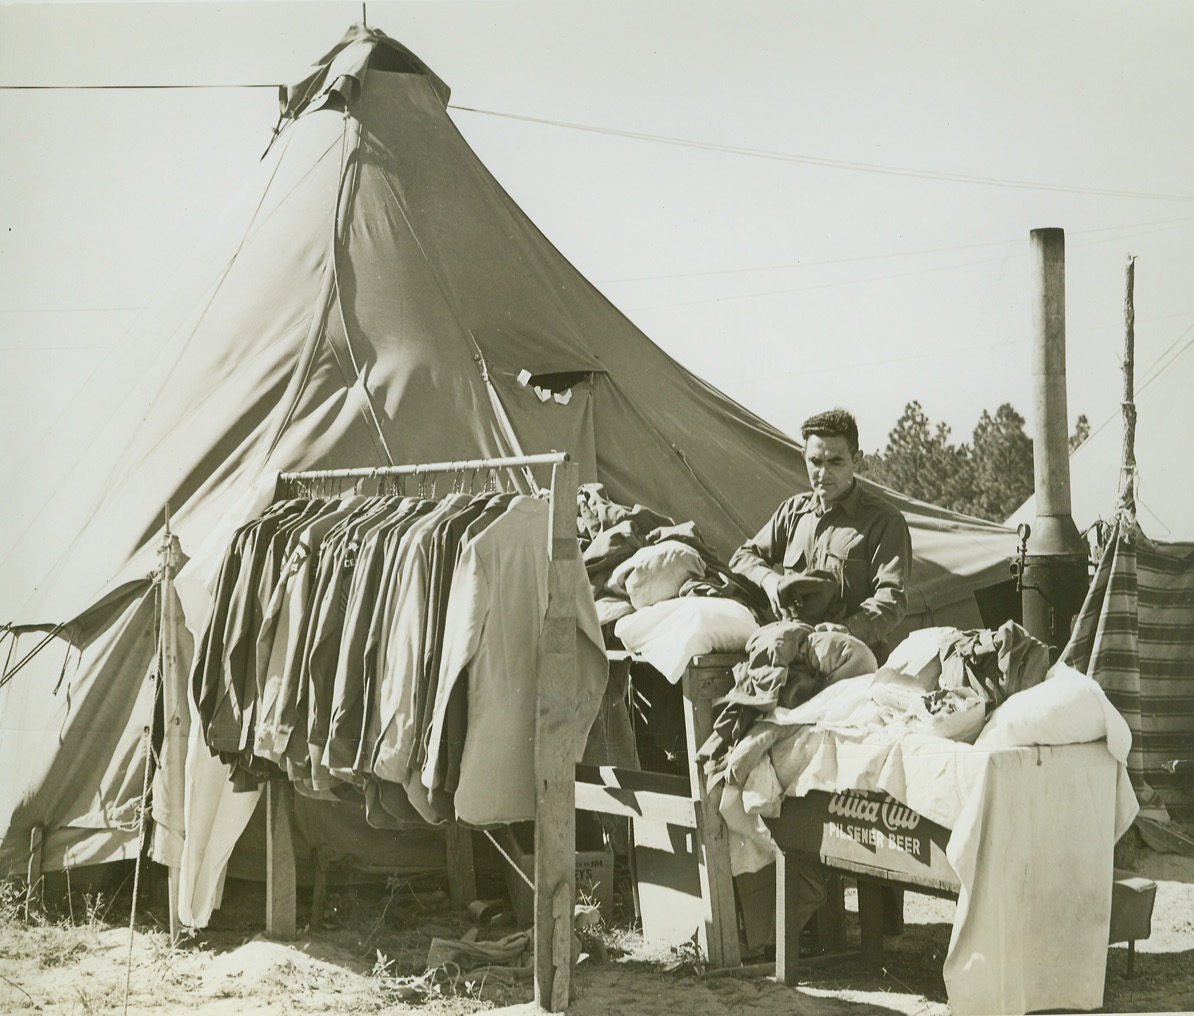 FIELD TAILOR SHOP MANESS, 10/26/1941. N.C. – Irving Levinson of New York, who has just put out a rack of freshly pressed uniforms for special troops of the 26th Division, goes to work assorting a new batch of laundry and uniforms. A civilian tailor, Levinson’s shop is now a tent in the camp area. In background right is the kerosene fired steam boiler for pressing. Credit: OWI Radiophoto from ACME